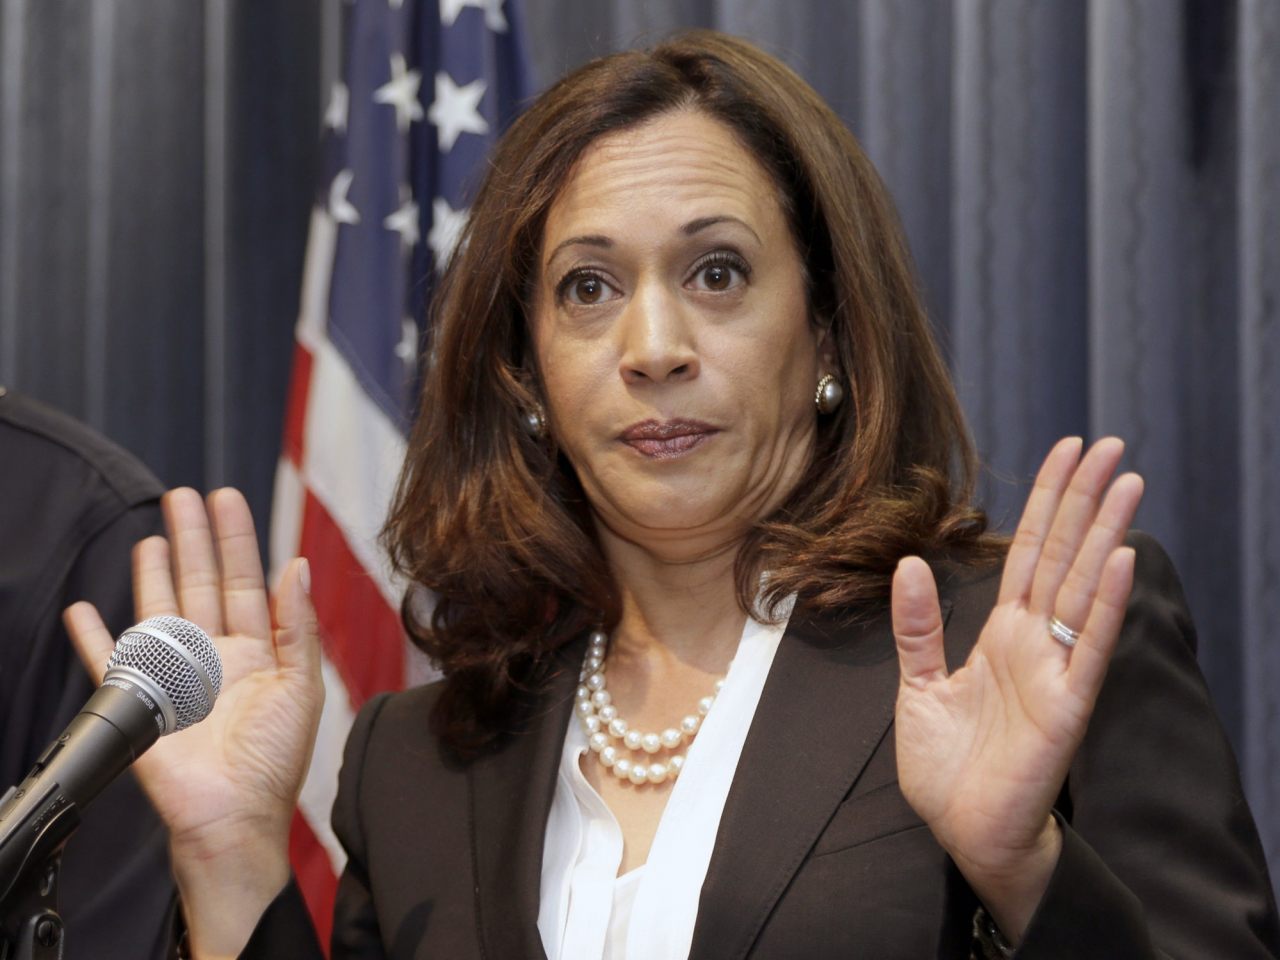 Image: Kamala Harris is lying. She and others are coming after your guns